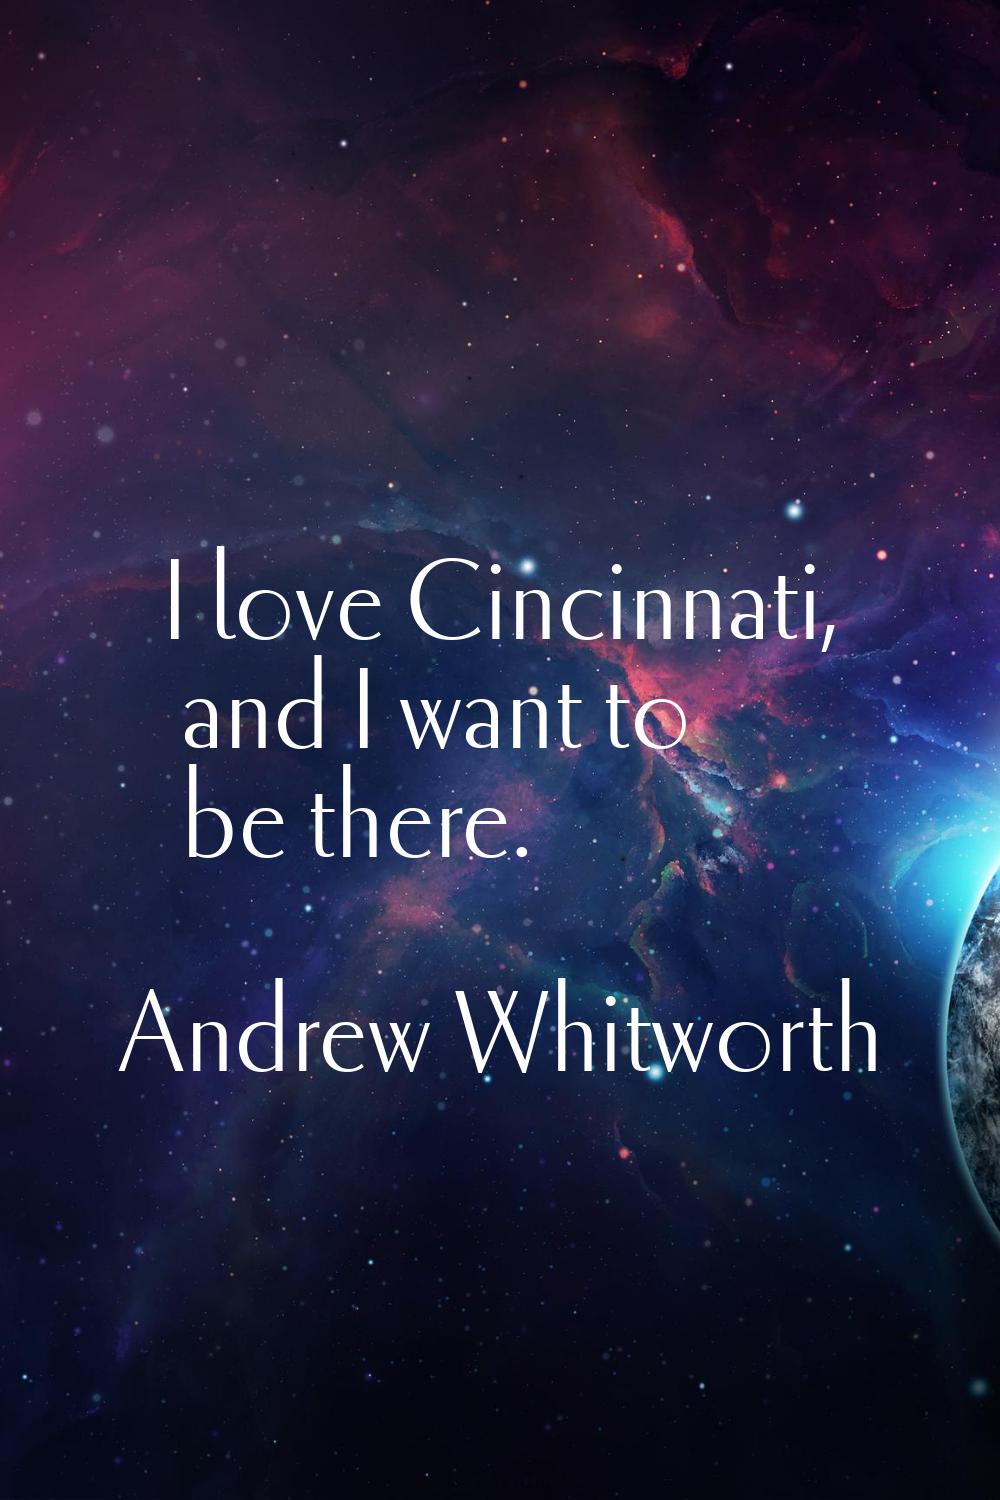 I love Cincinnati, and I want to be there.